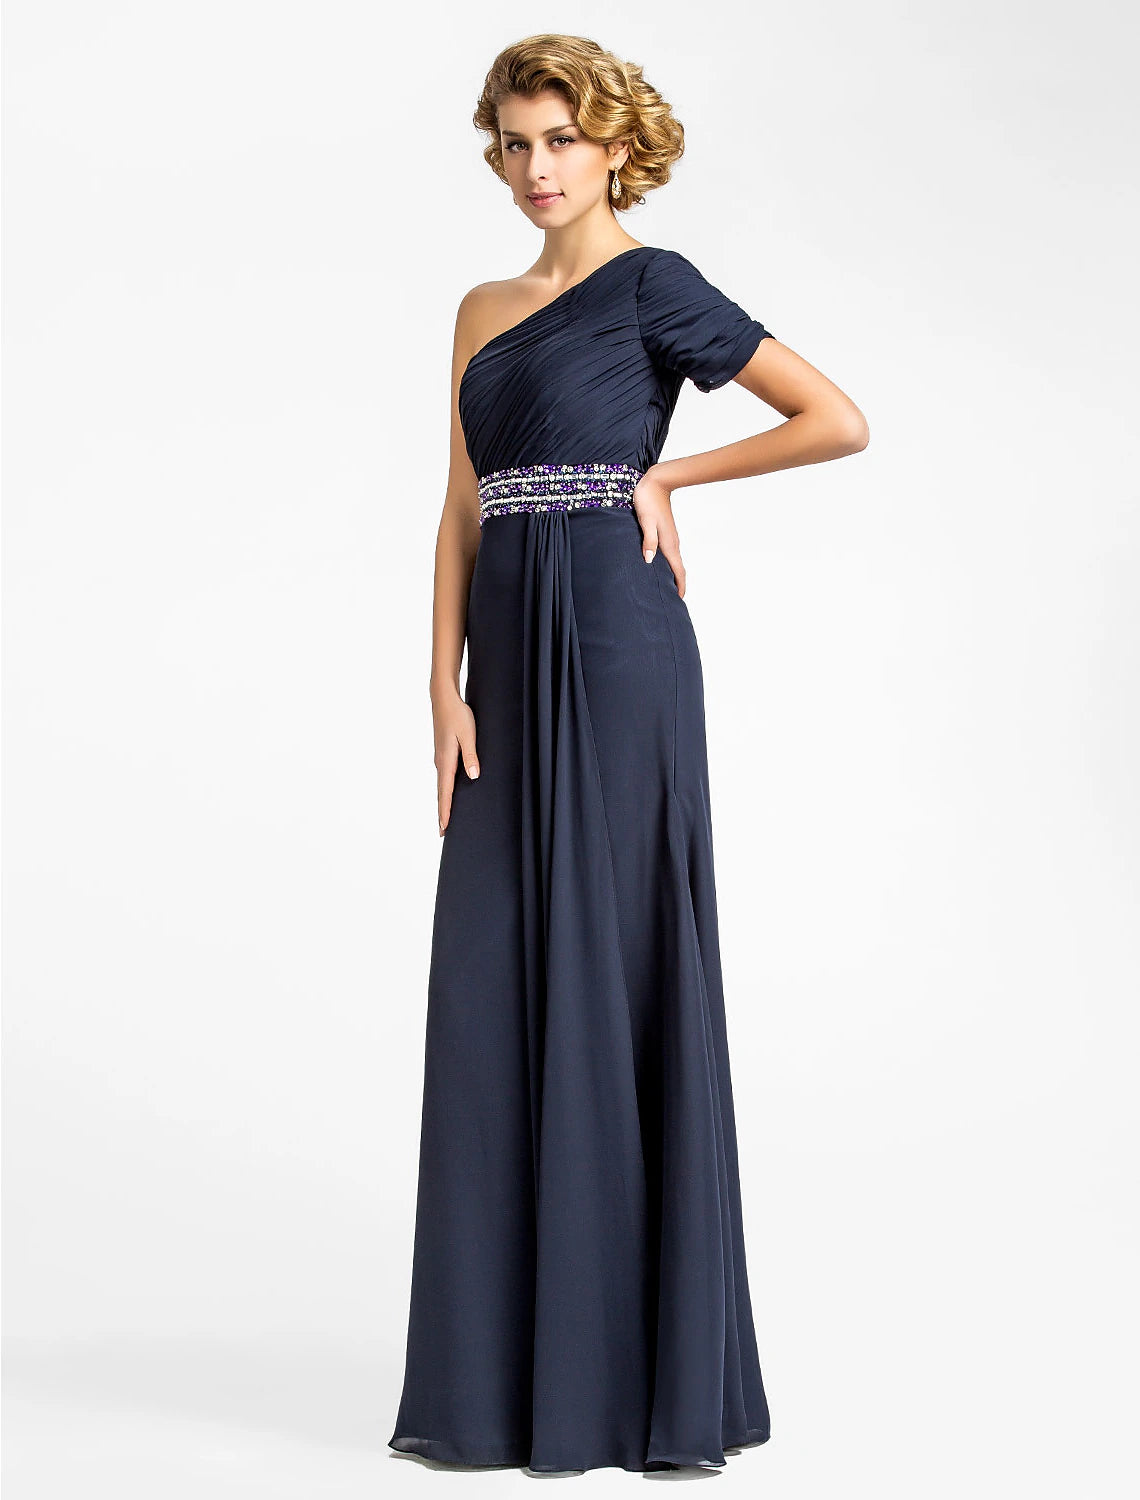 Sheath / Column Mother of the Bride Dress Sparkle & Shine One Shoulder Floor Length Chiffon Short Sleeve with Beading Draping Side Draping